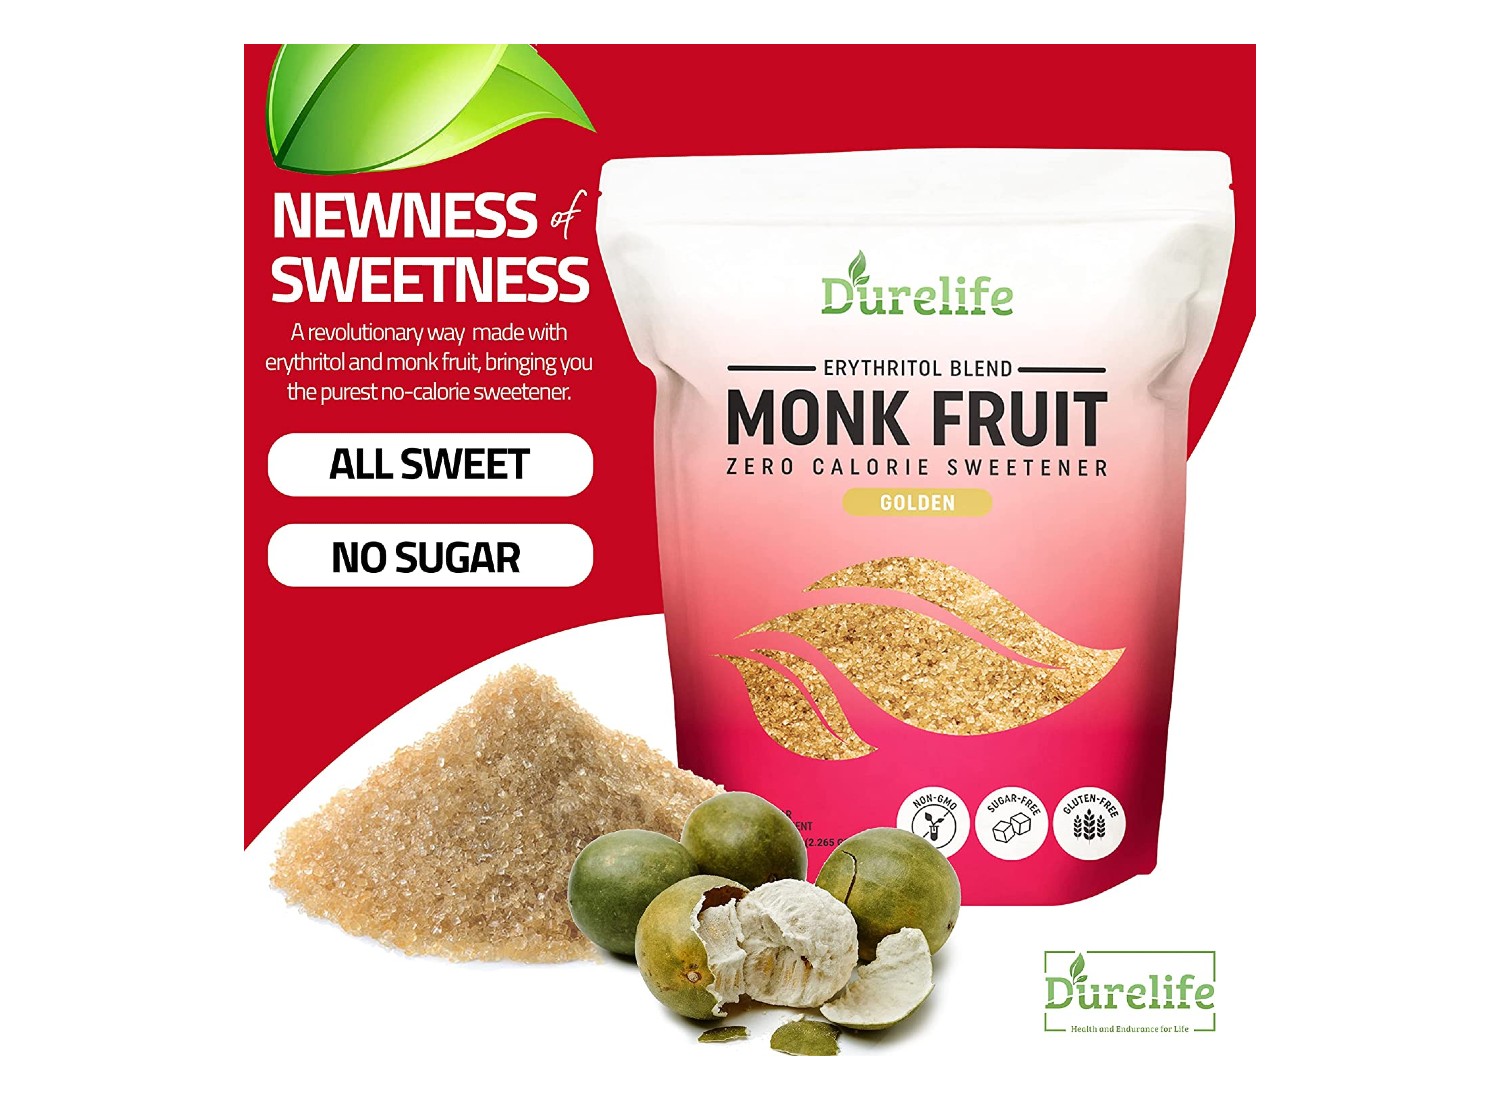 Monk Fruit Sweeteners: What You Need to Know